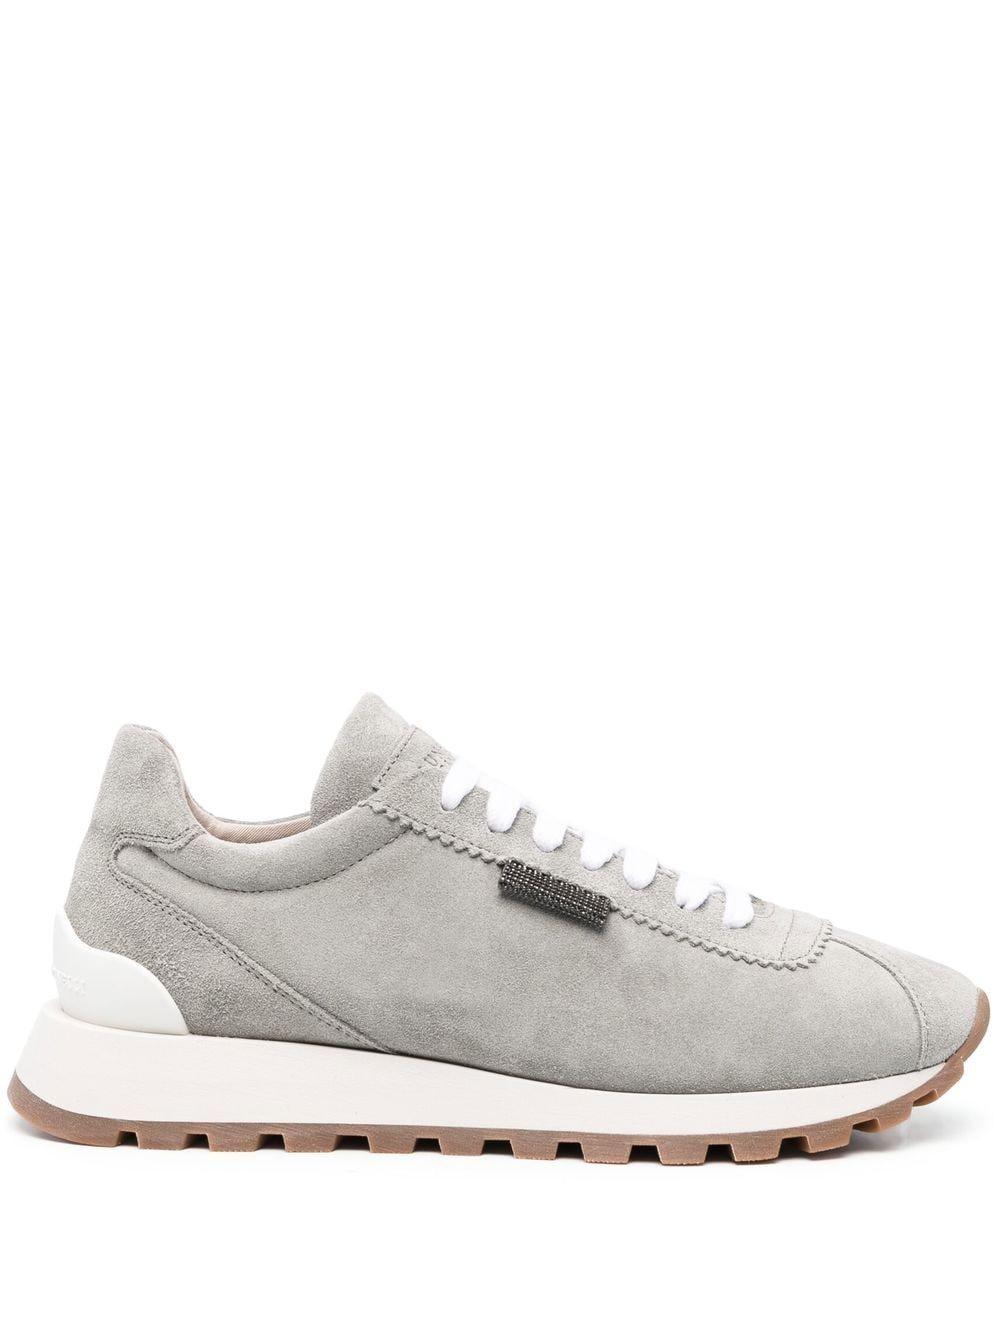 Brunello Cucinelli Chunky Suede Sneakers in White | Lyst